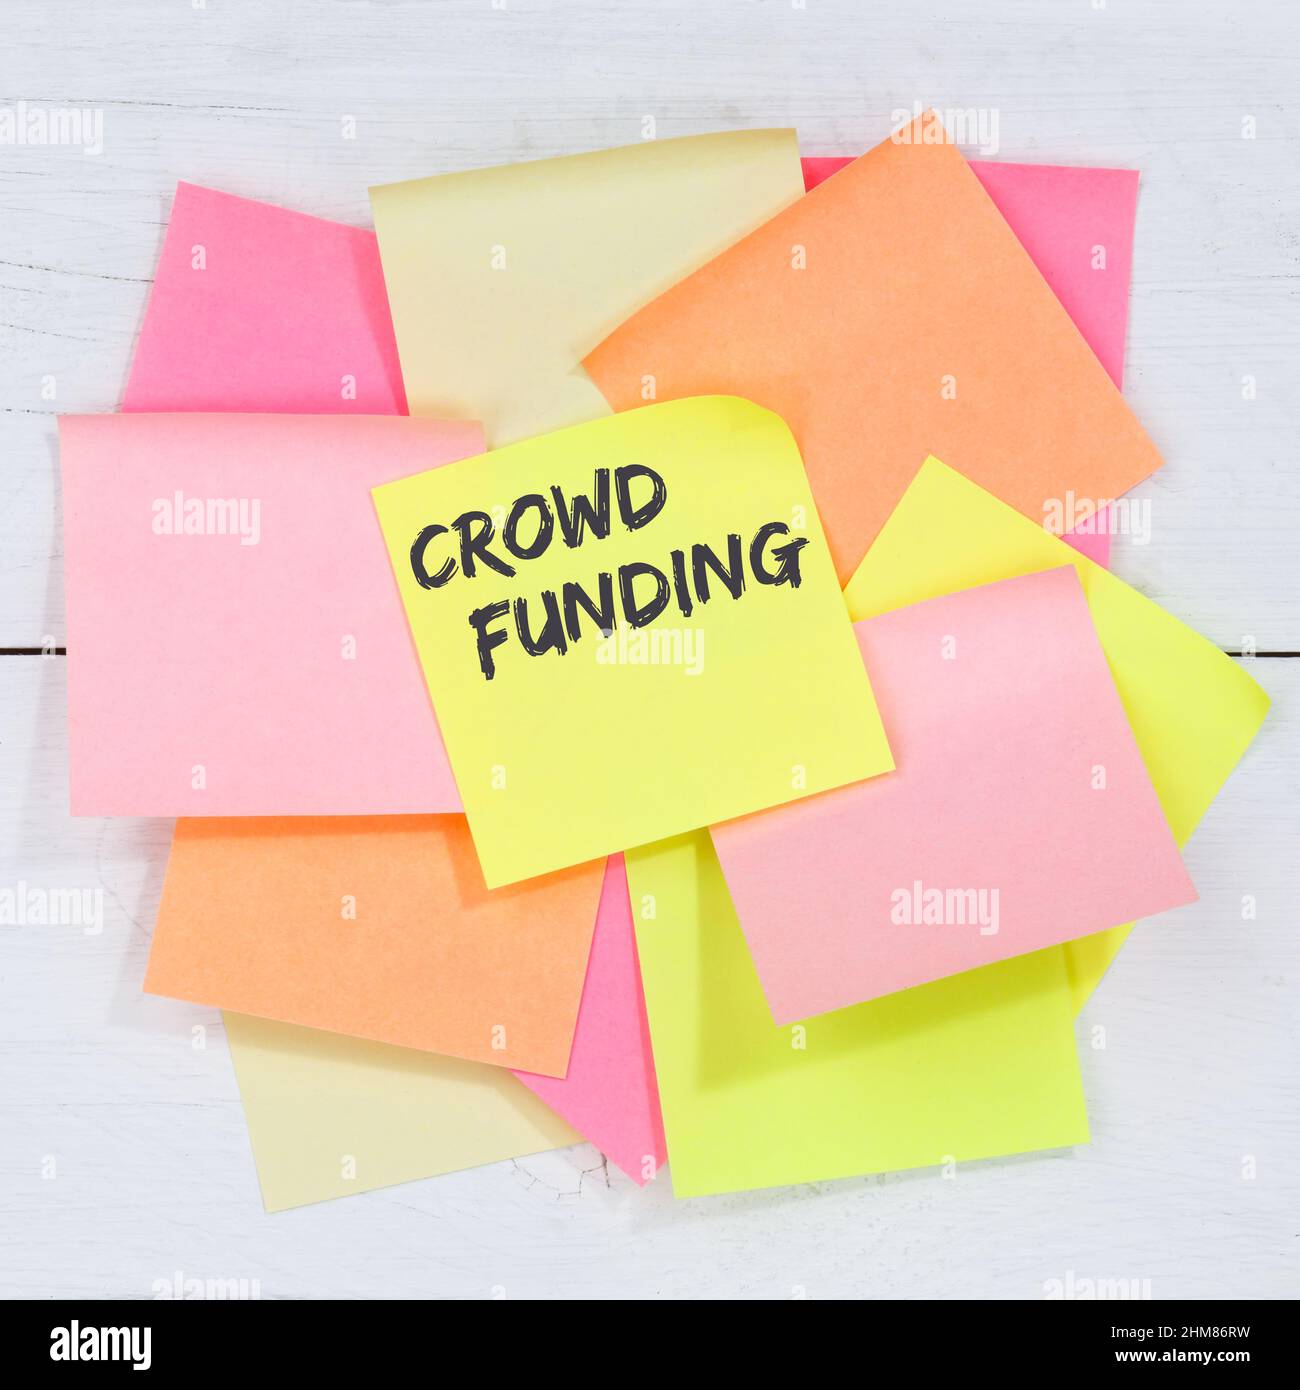 Crowd funding crowdfunding collecting money online investment internet business concept desk note paper notepaper Stock Photo